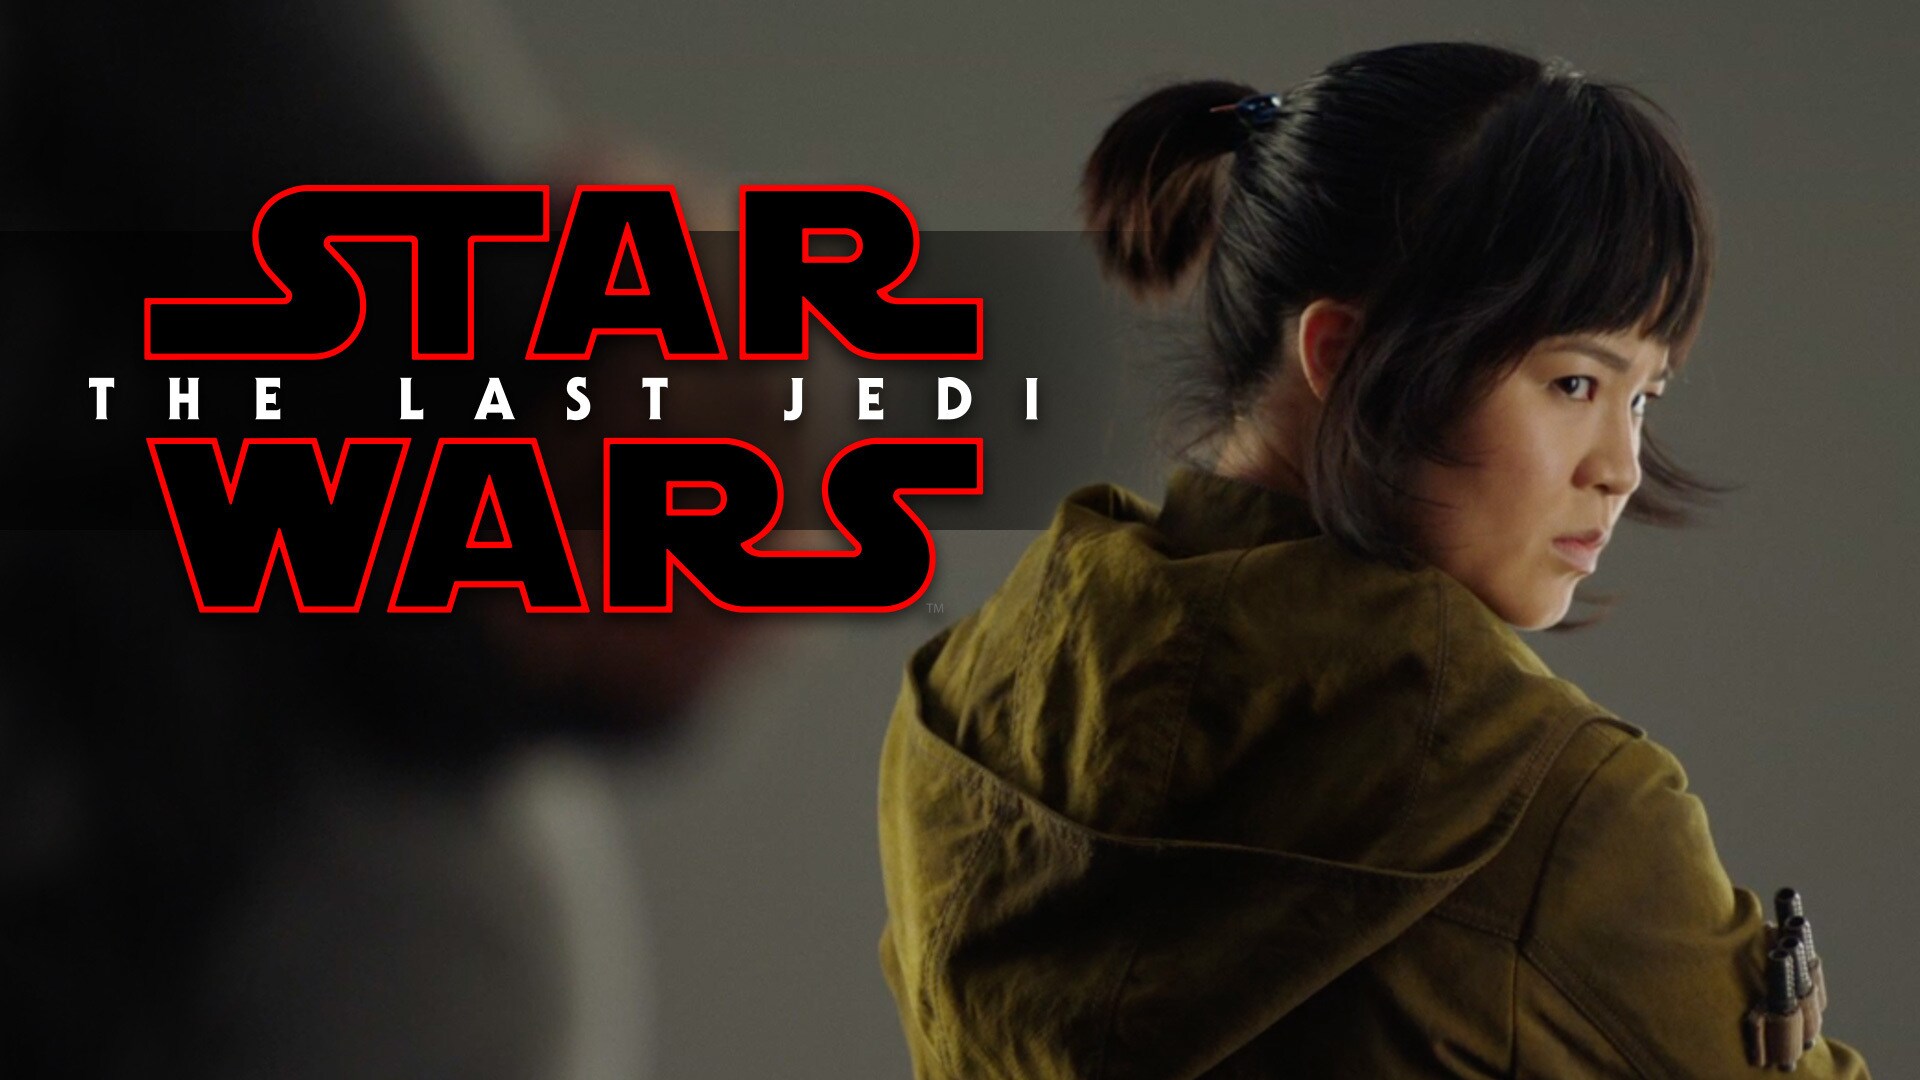 Becoming Rose - Star Wars: The Last Jedi